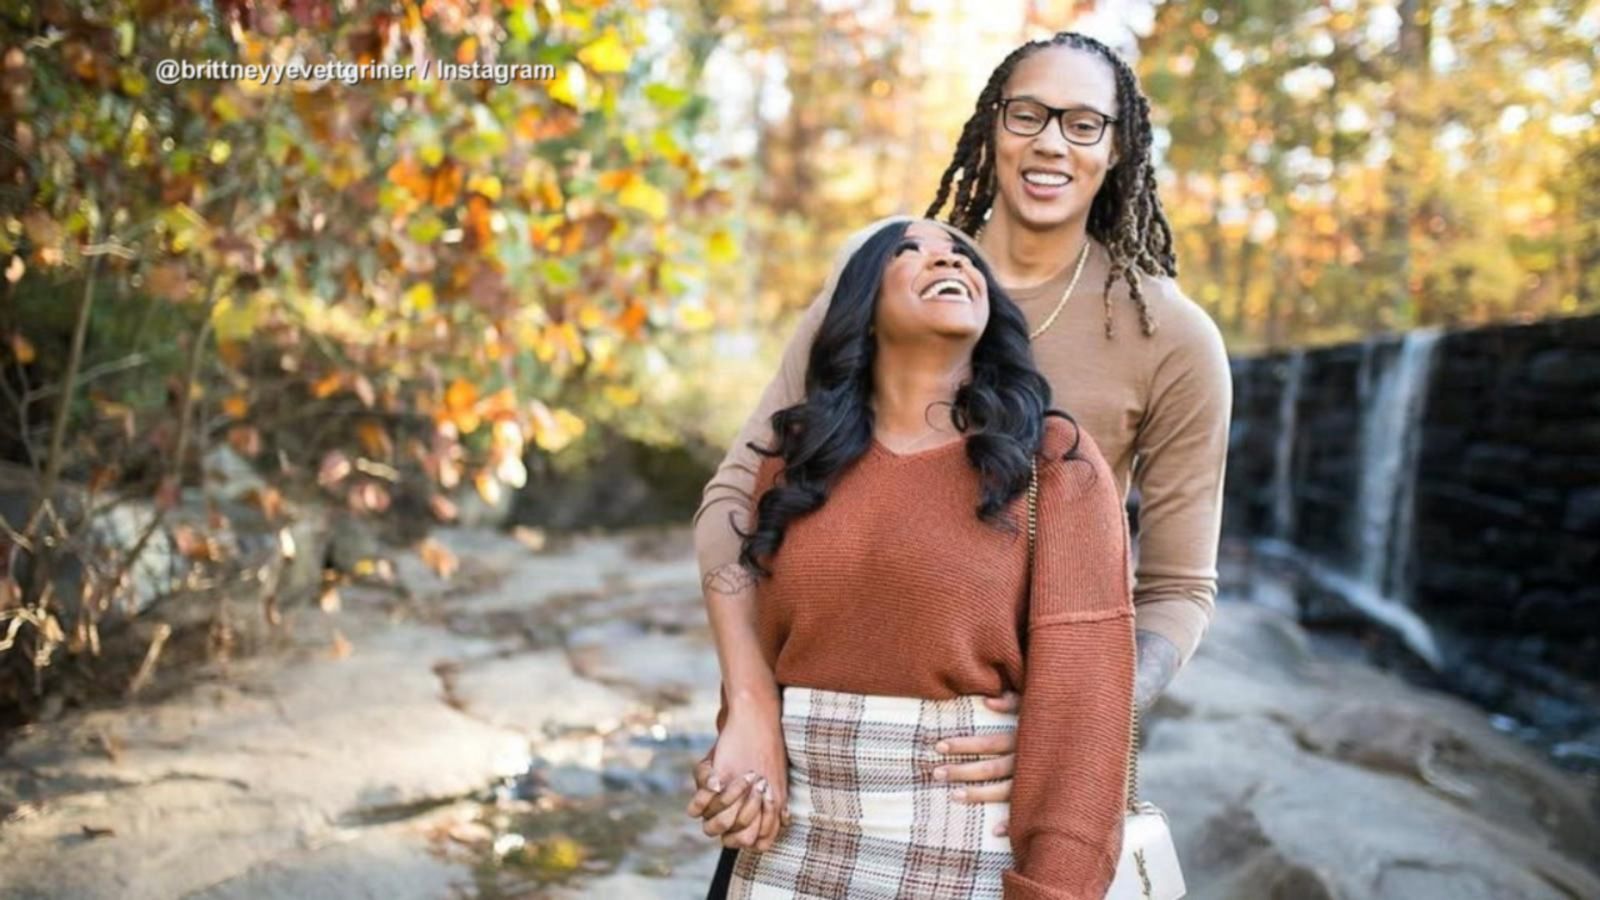 Brittney Griner reunites with wife Cherelle upon return to US Good